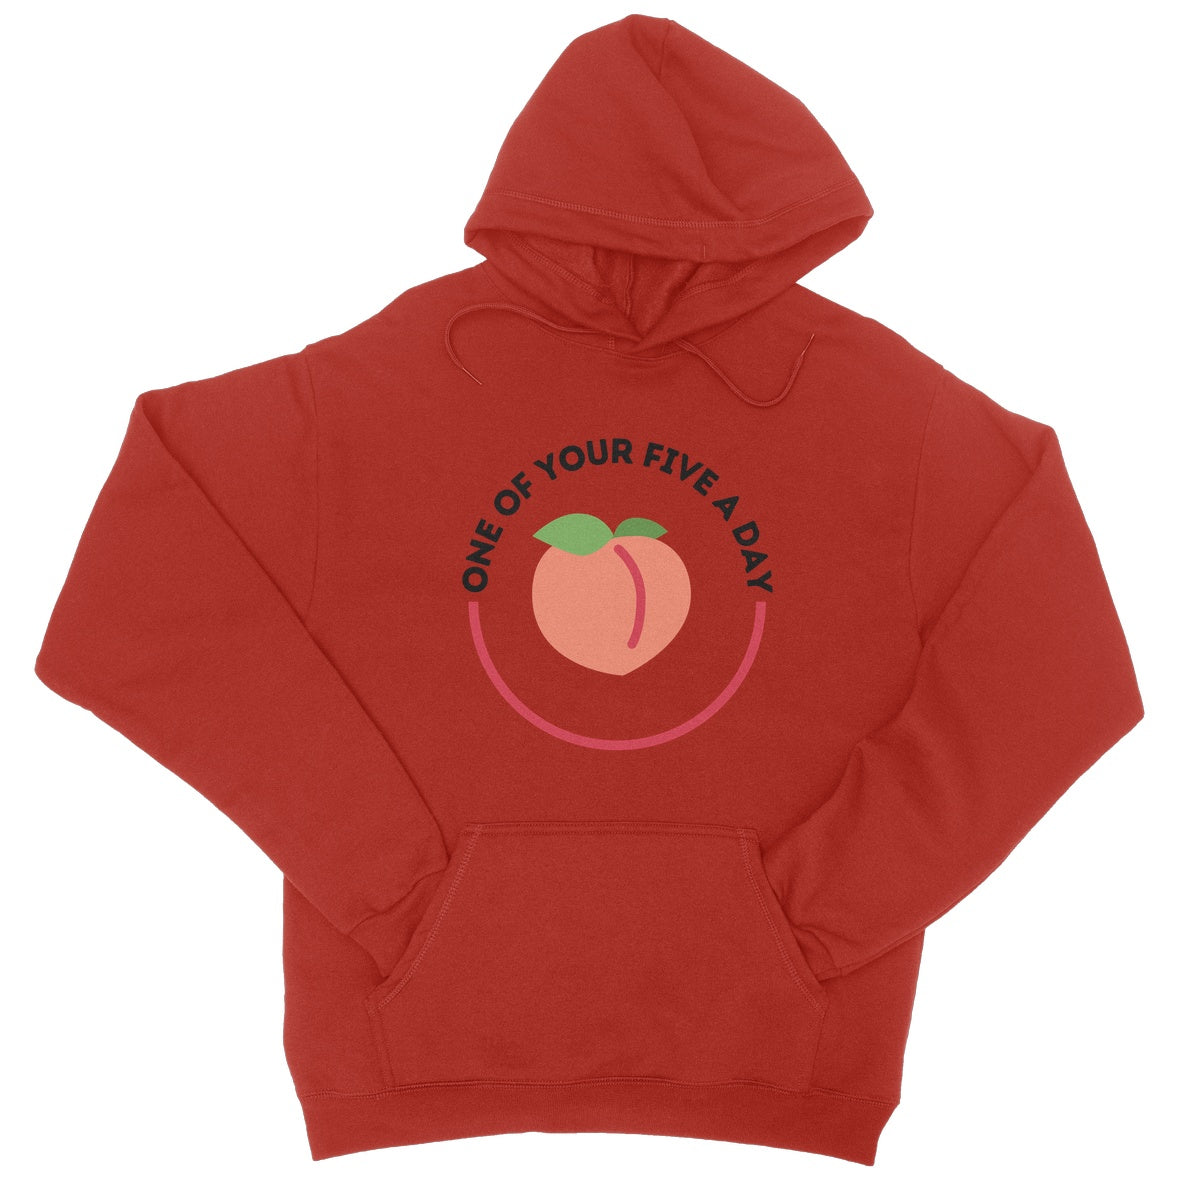 one of your five a day hoodie red